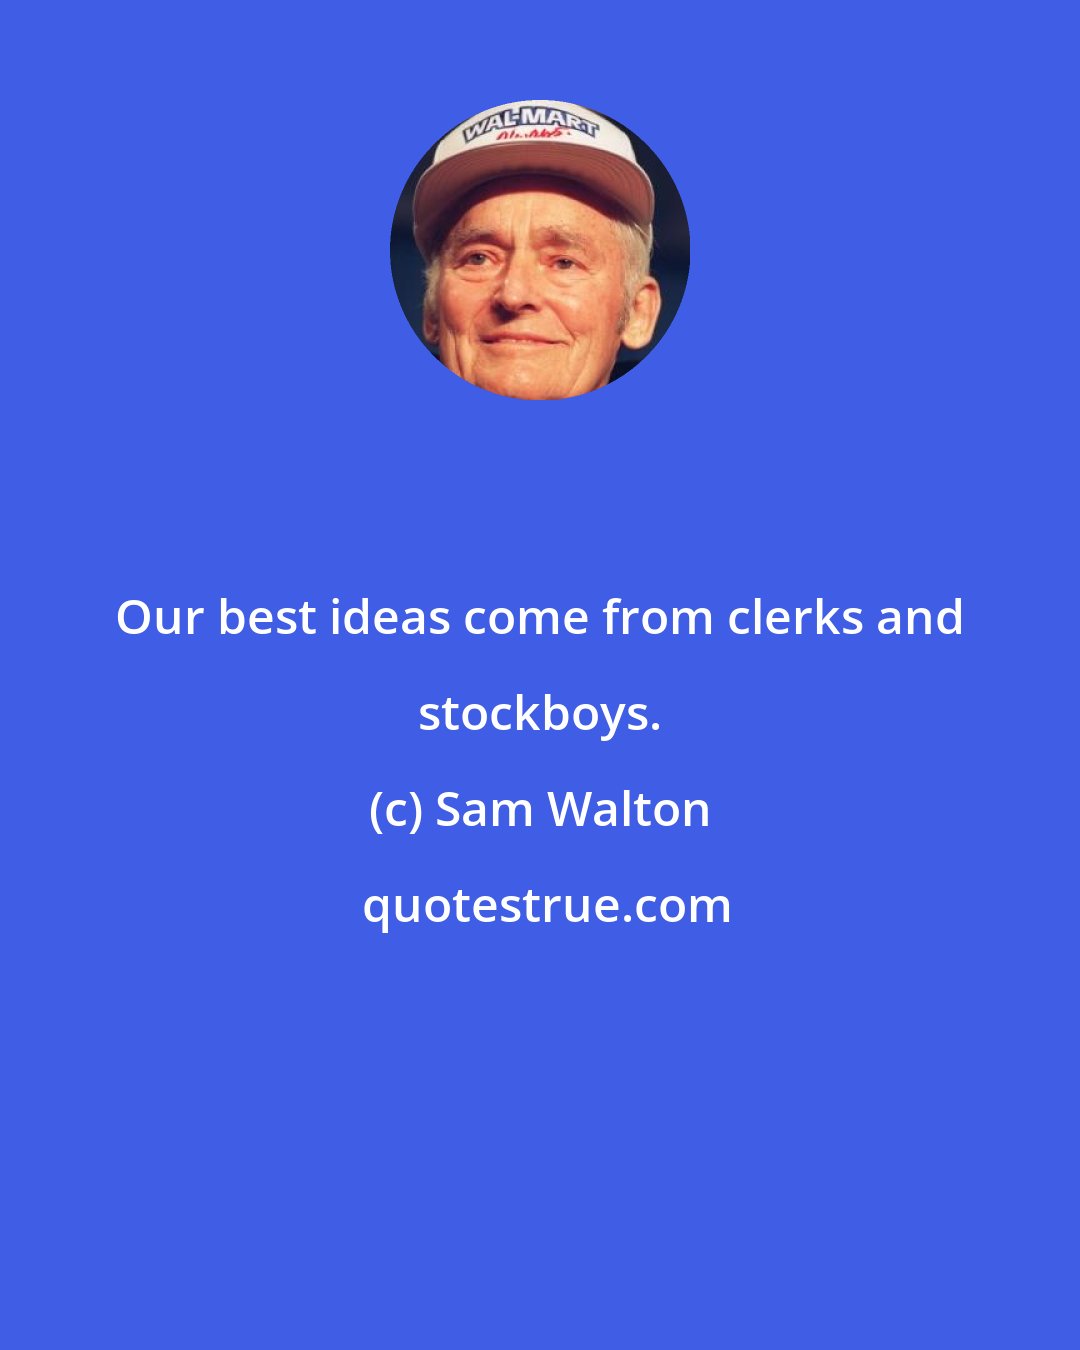 Sam Walton: Our best ideas come from clerks and stockboys.